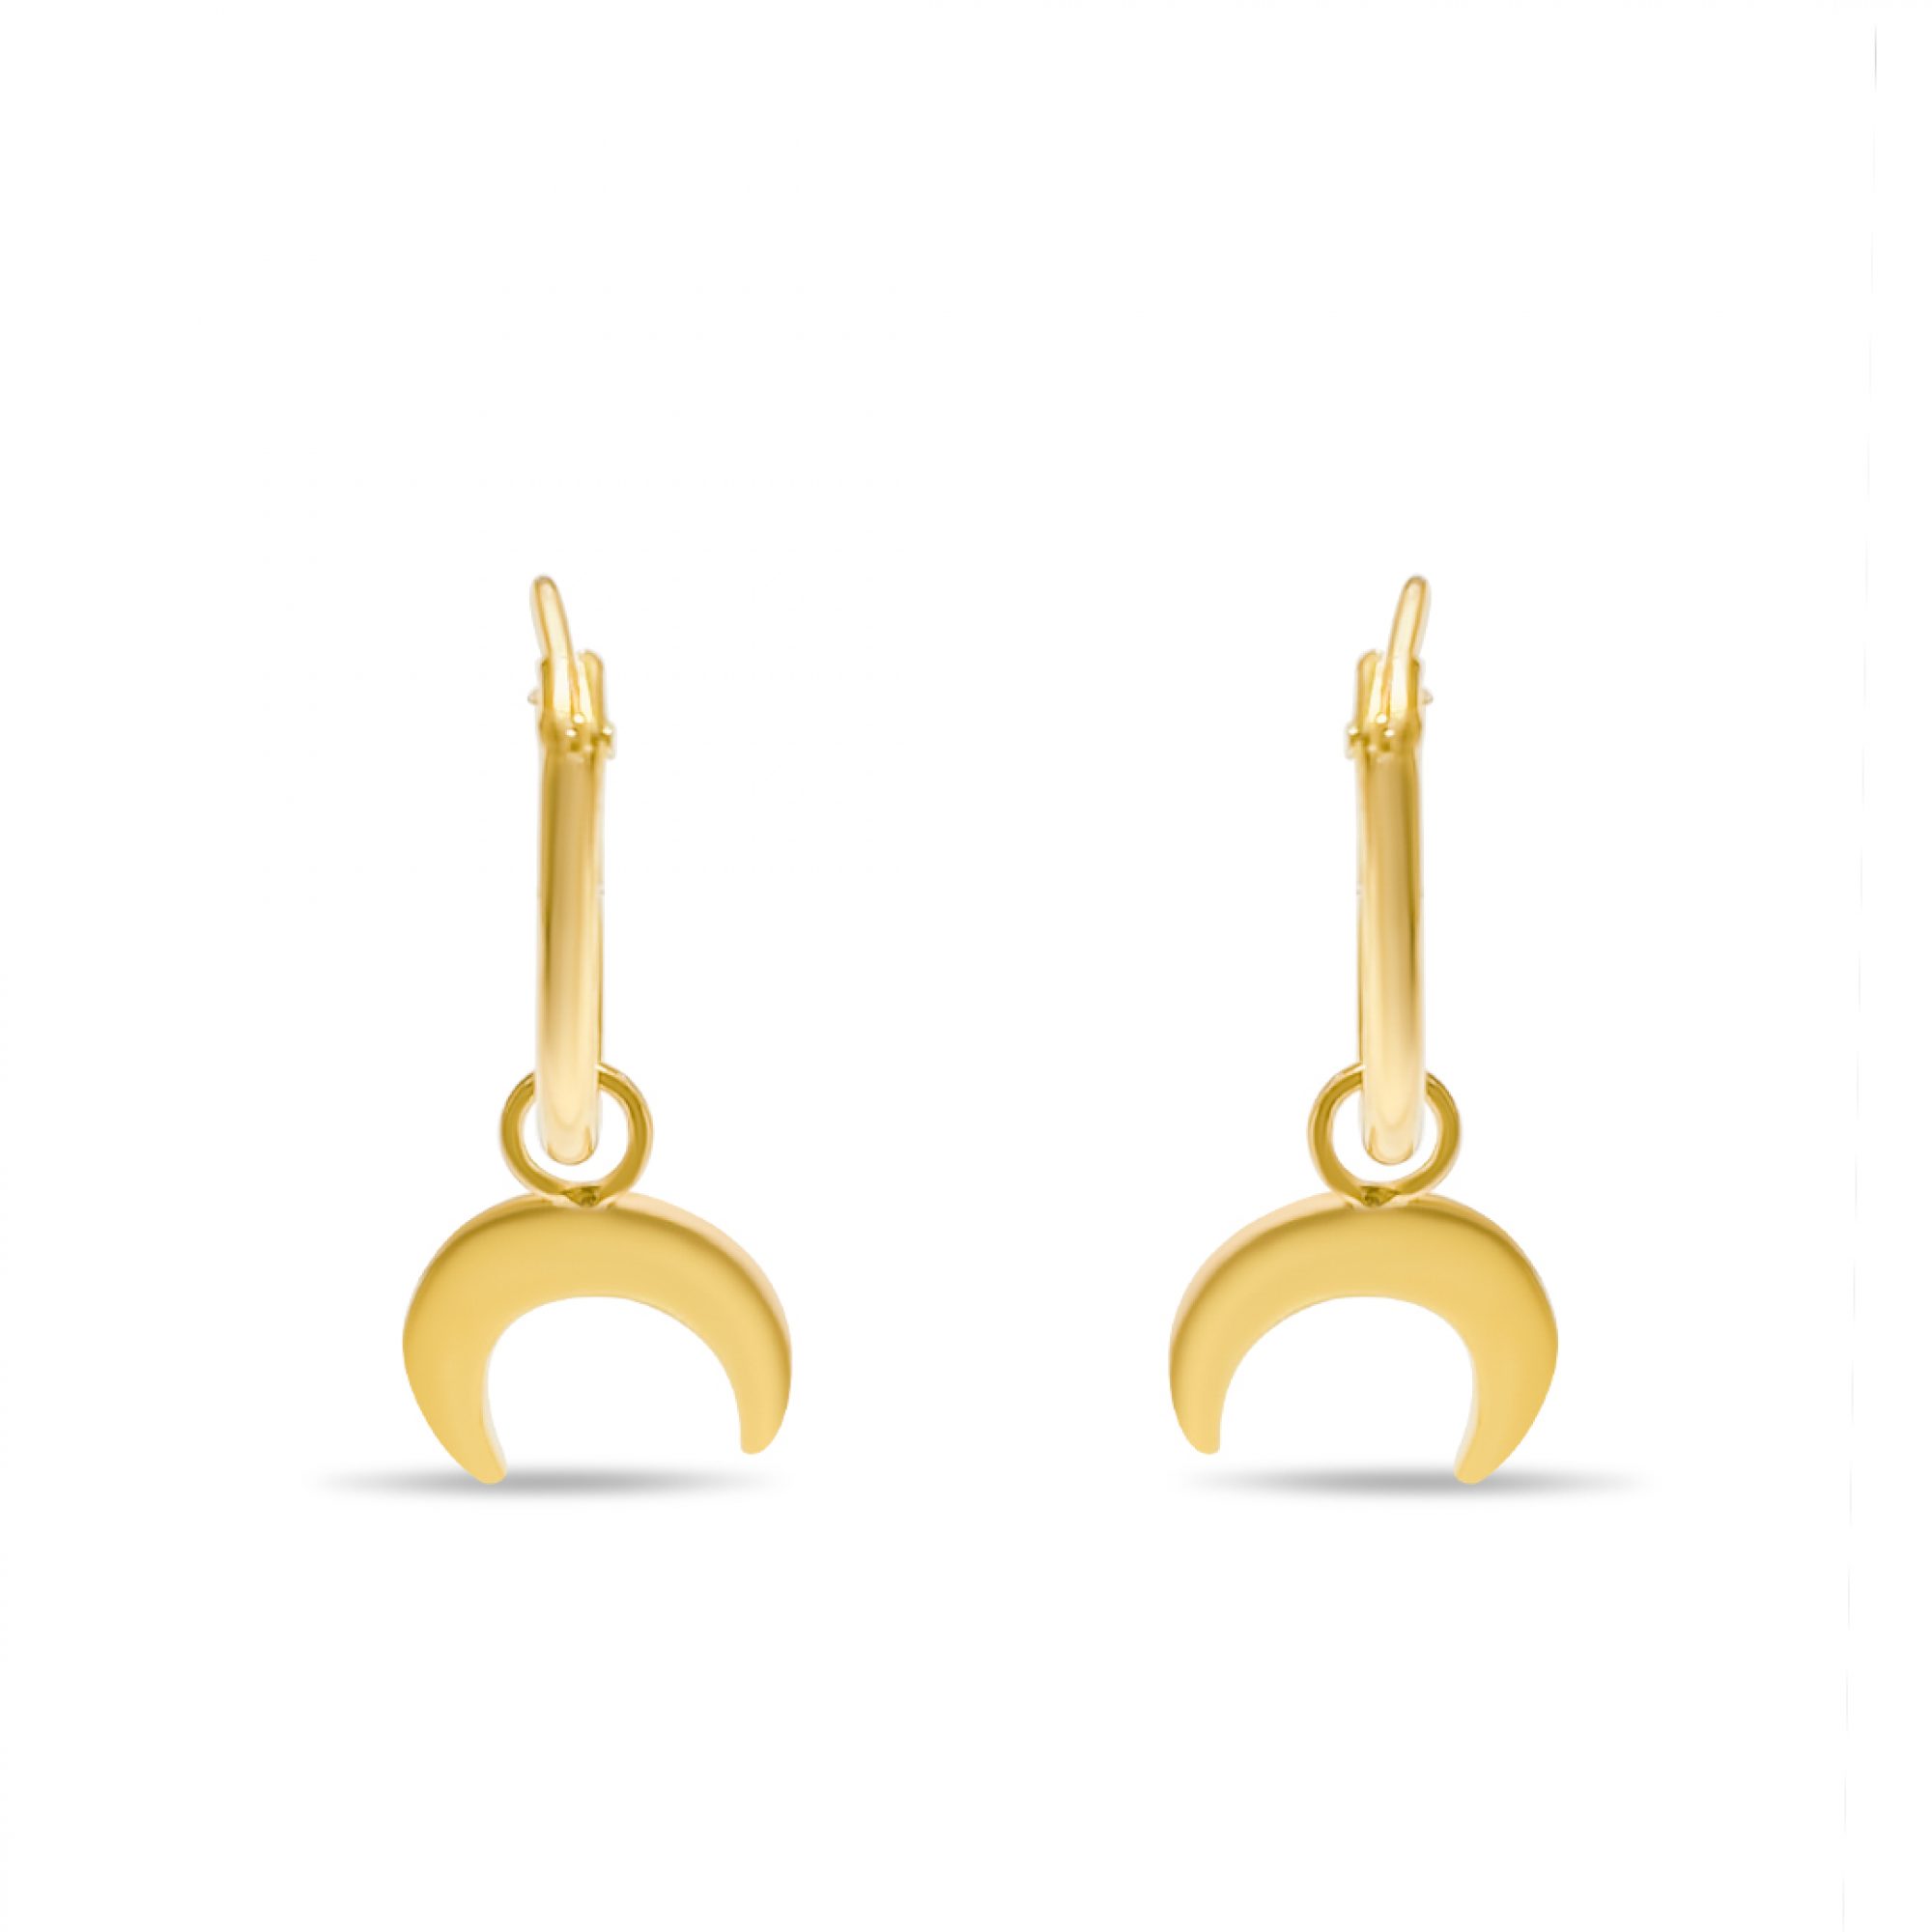 Gold plated earrings with dangle moon